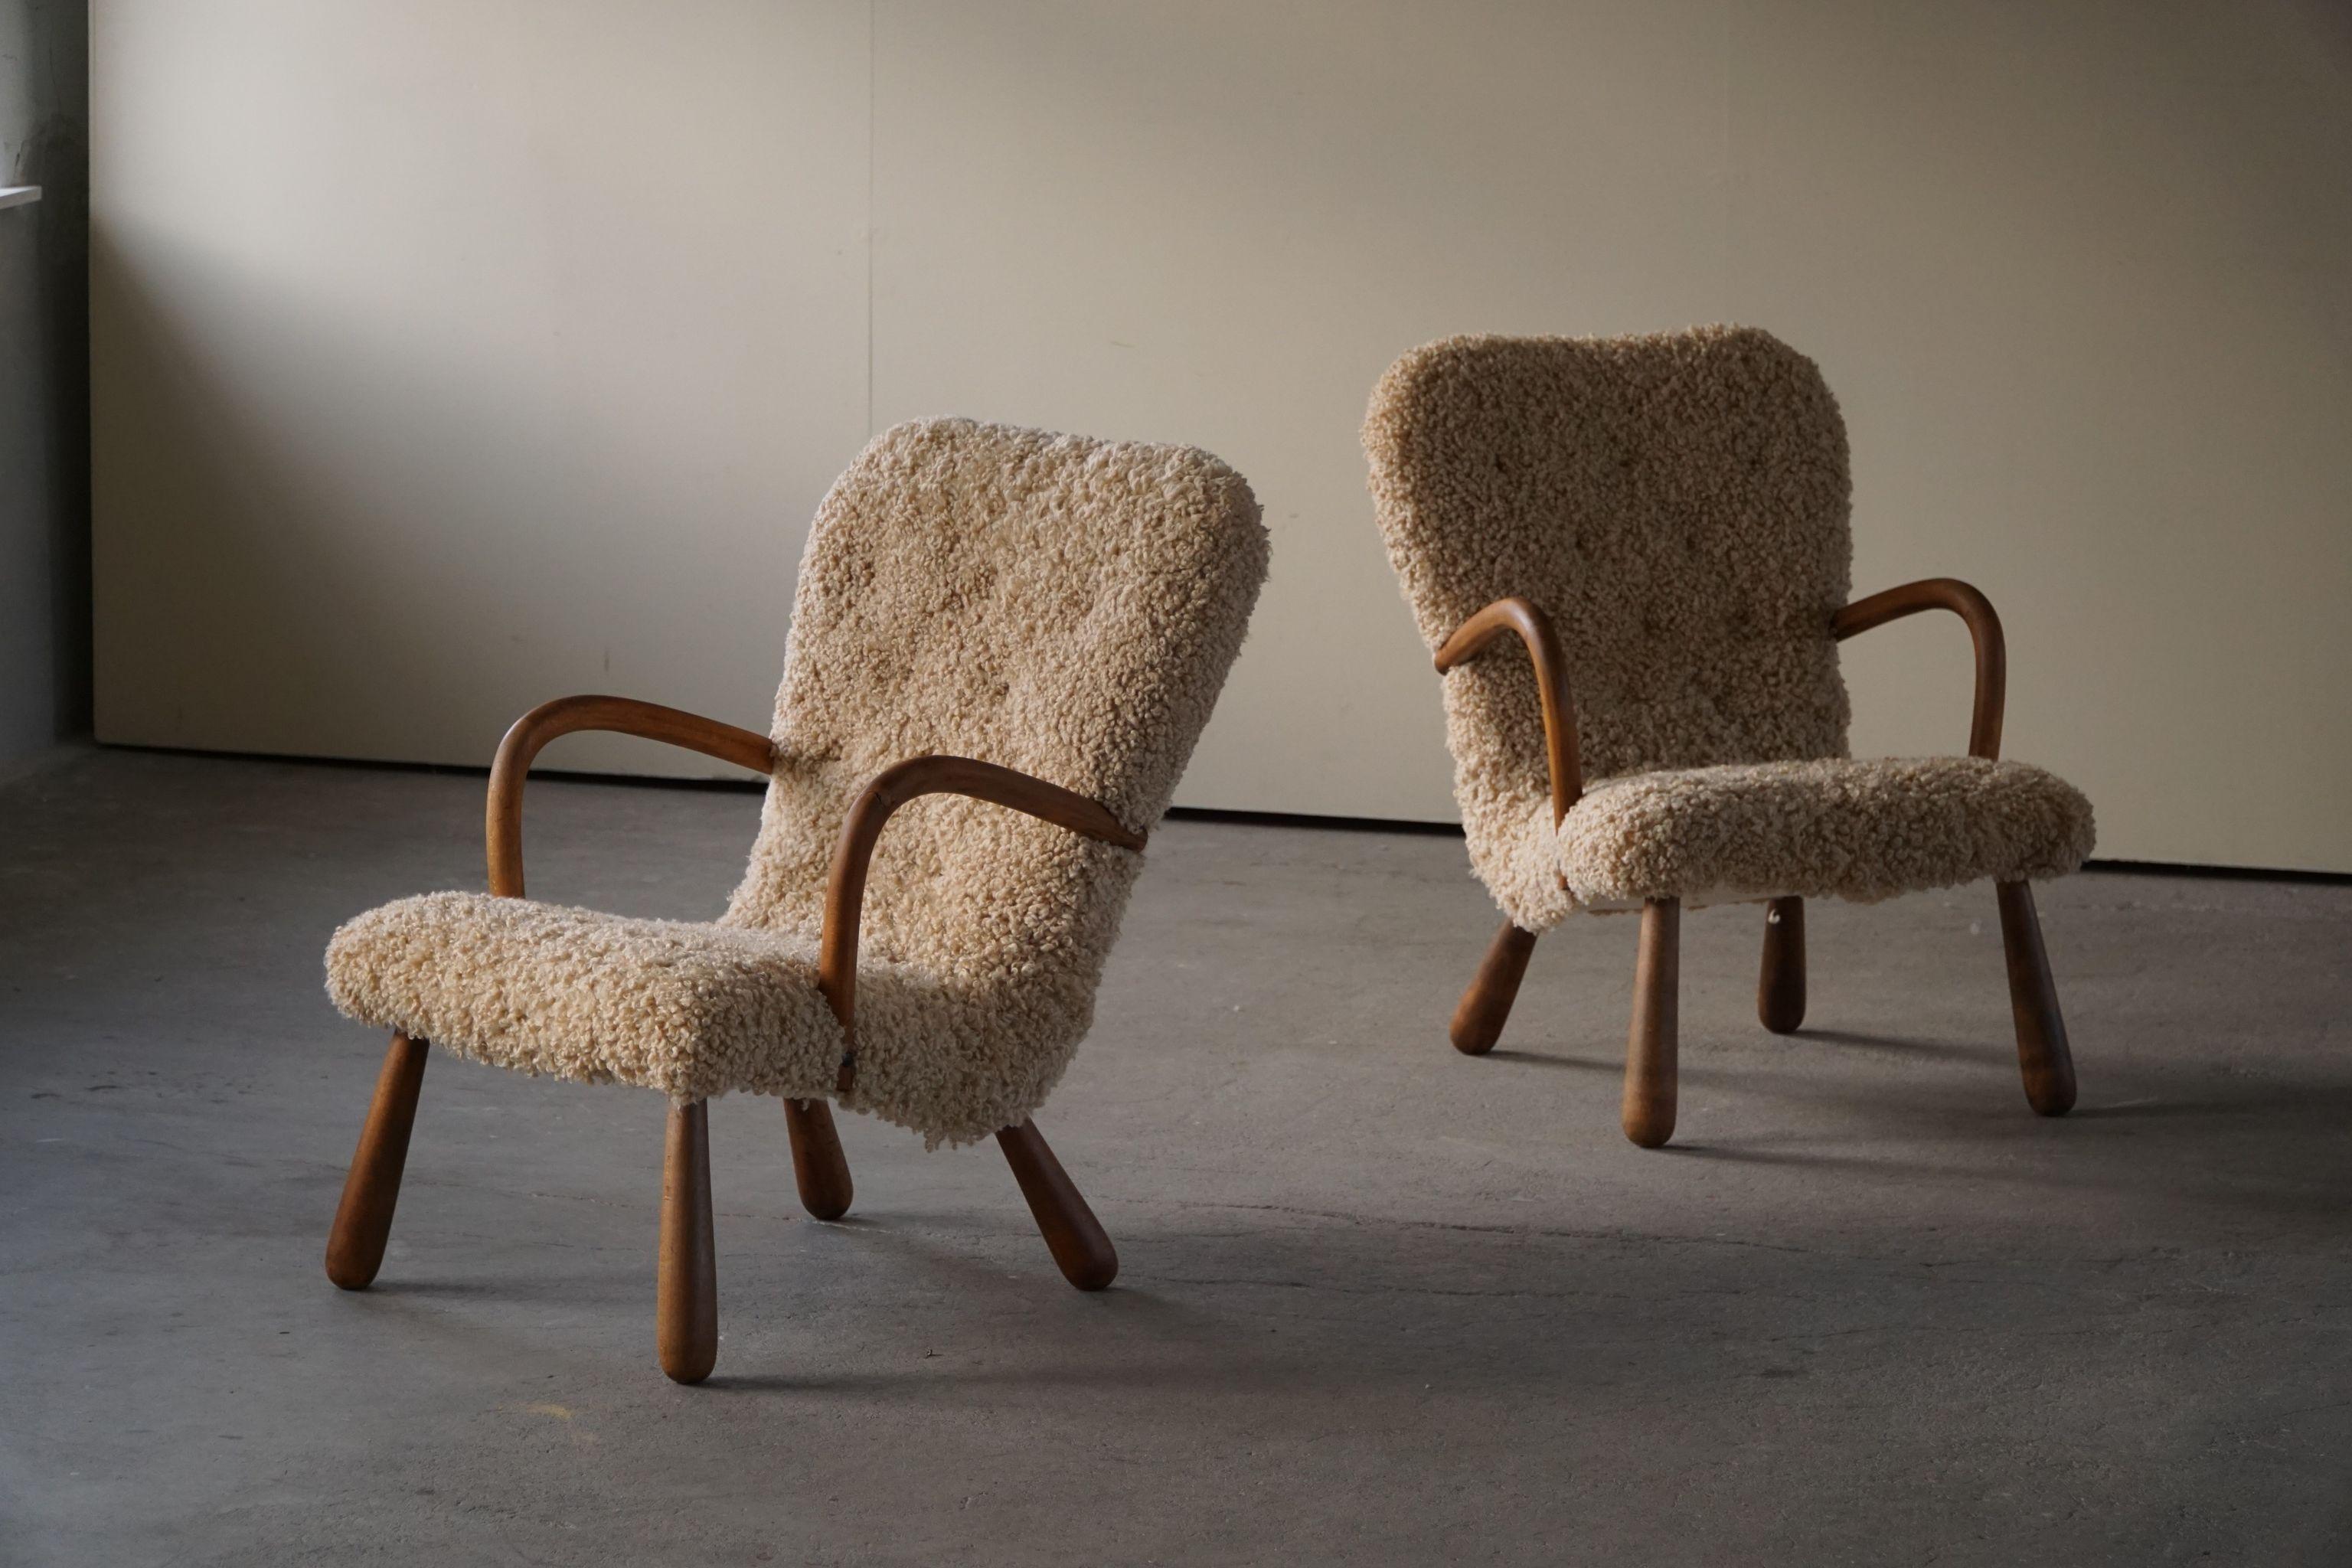 Pair of Clam Lounge Chairs in Lambswool, Skive Møbelfabrik, Denmark, 1950s For Sale 1